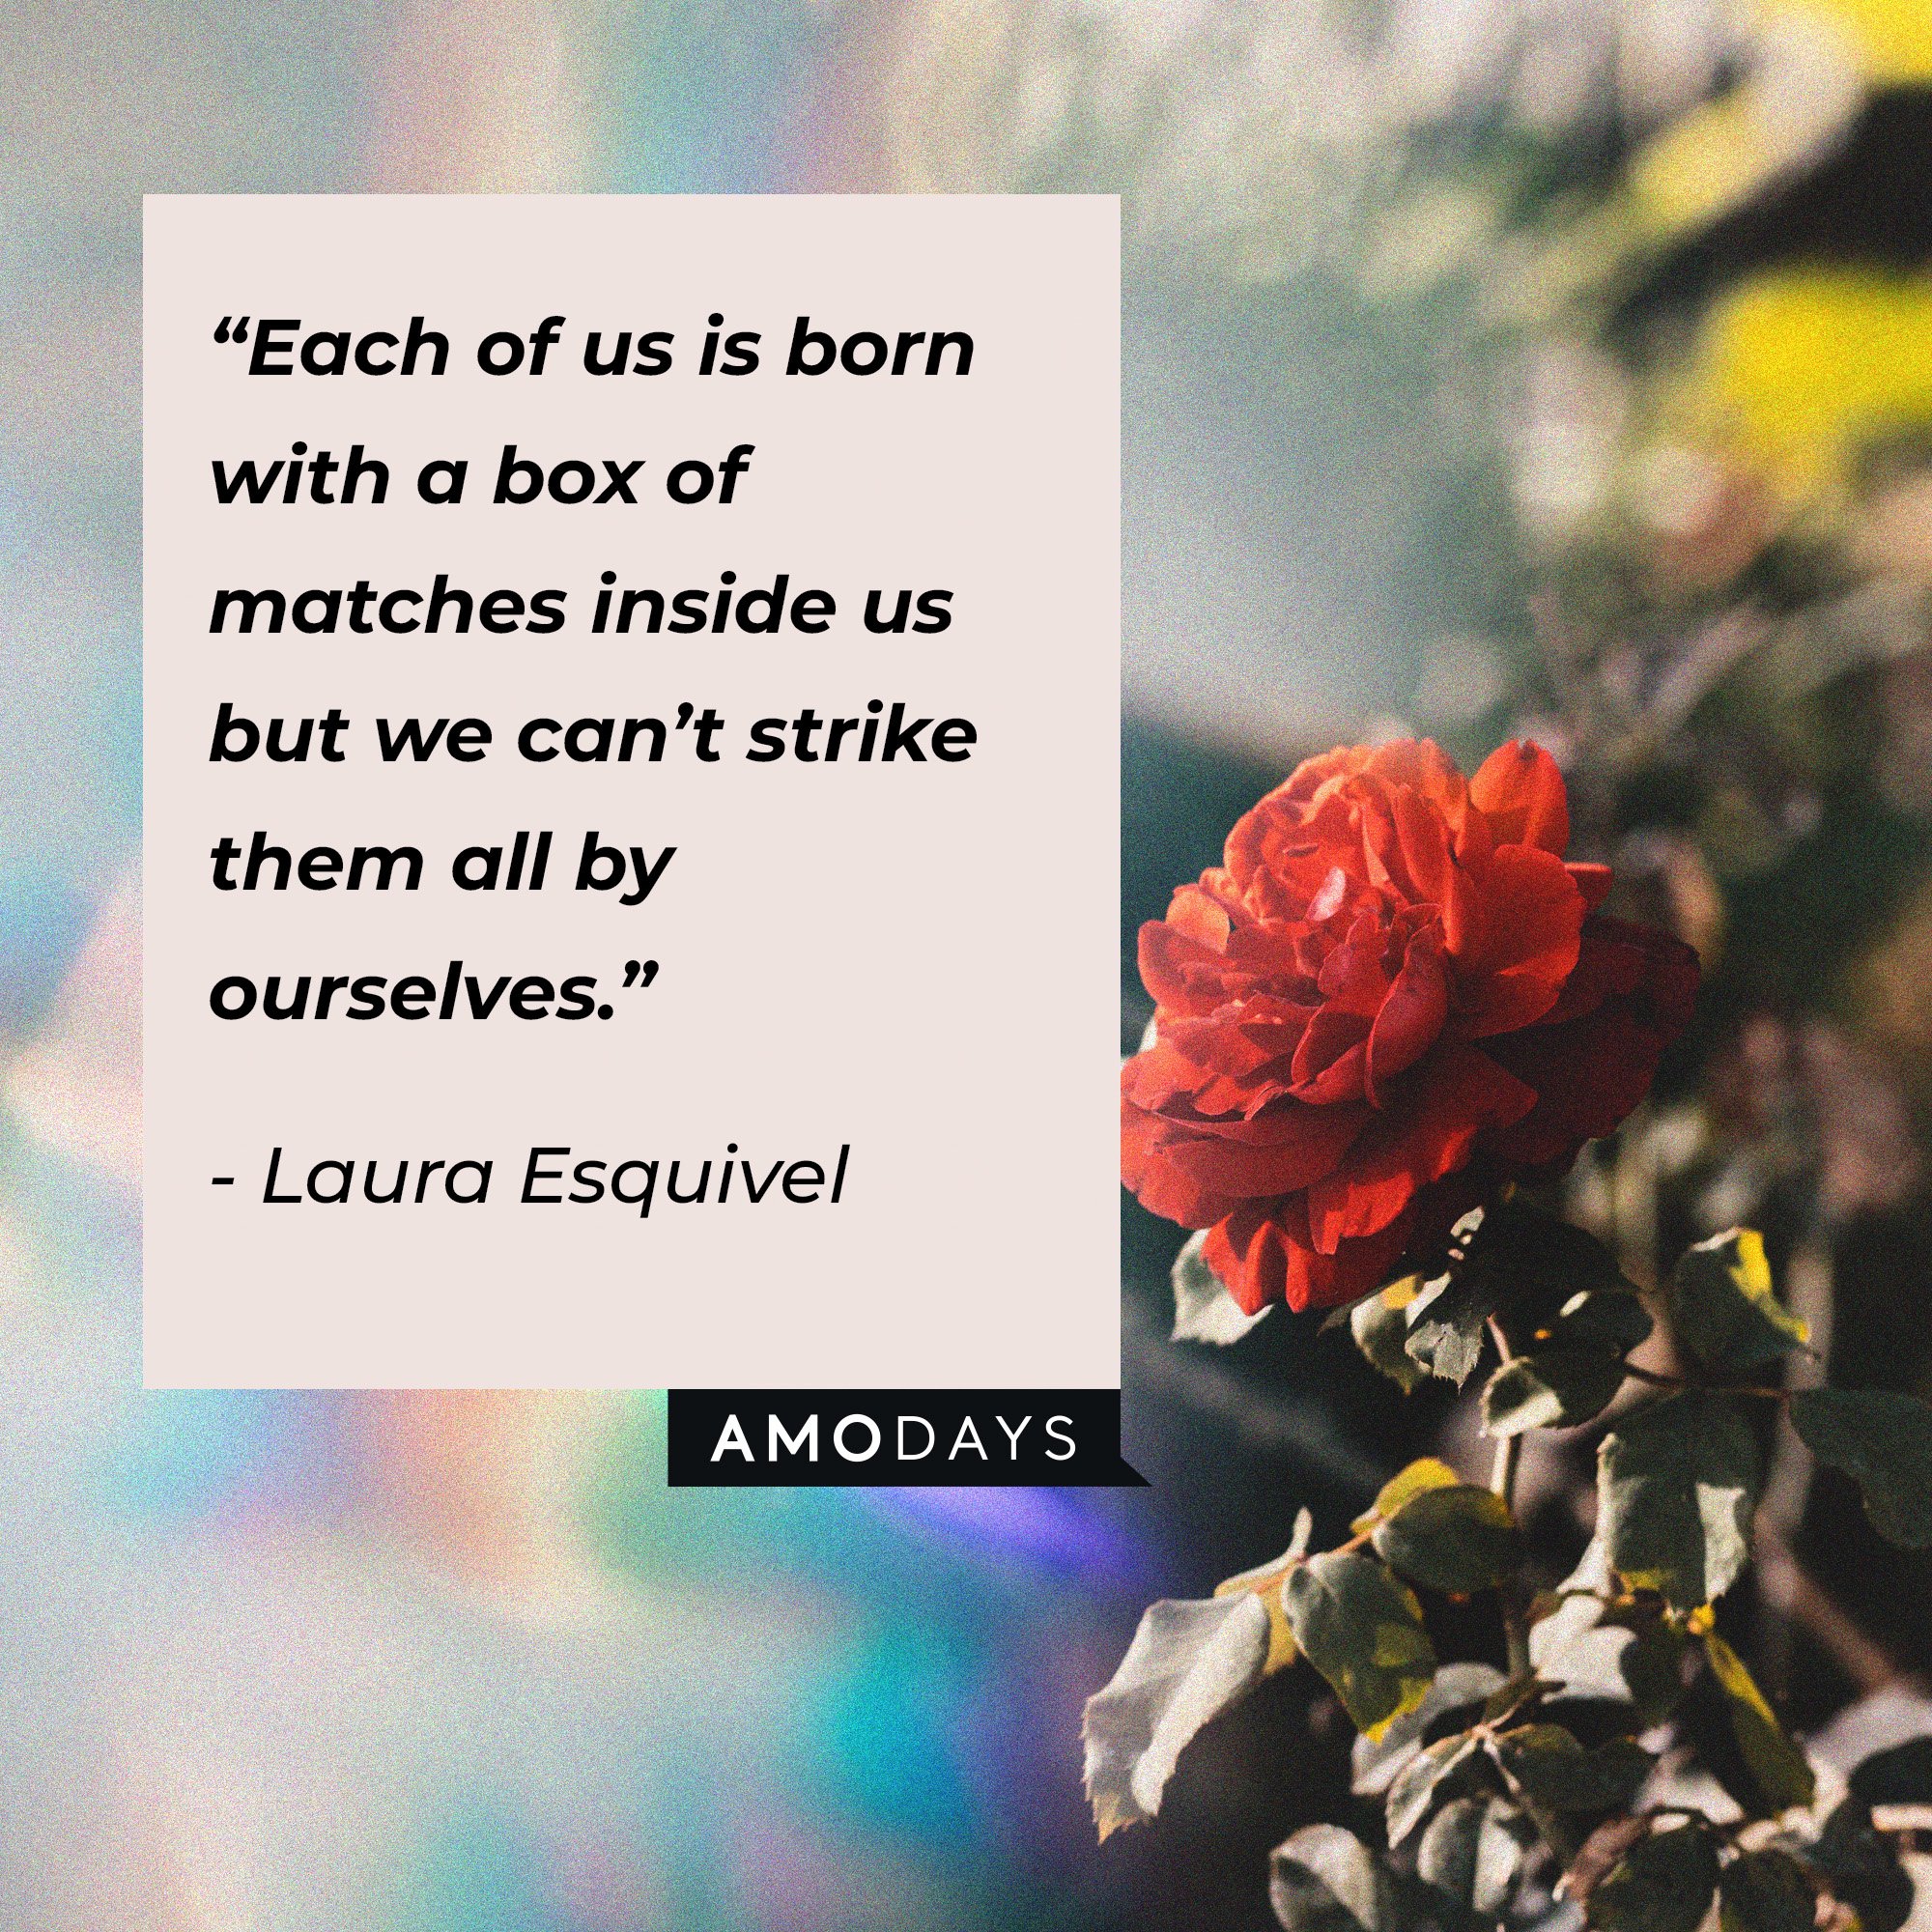  Laura Esquivel's quote: “Each of us is born with a box of matches inside us but we can’t strike them all by ourselves.” | Image: Amodays